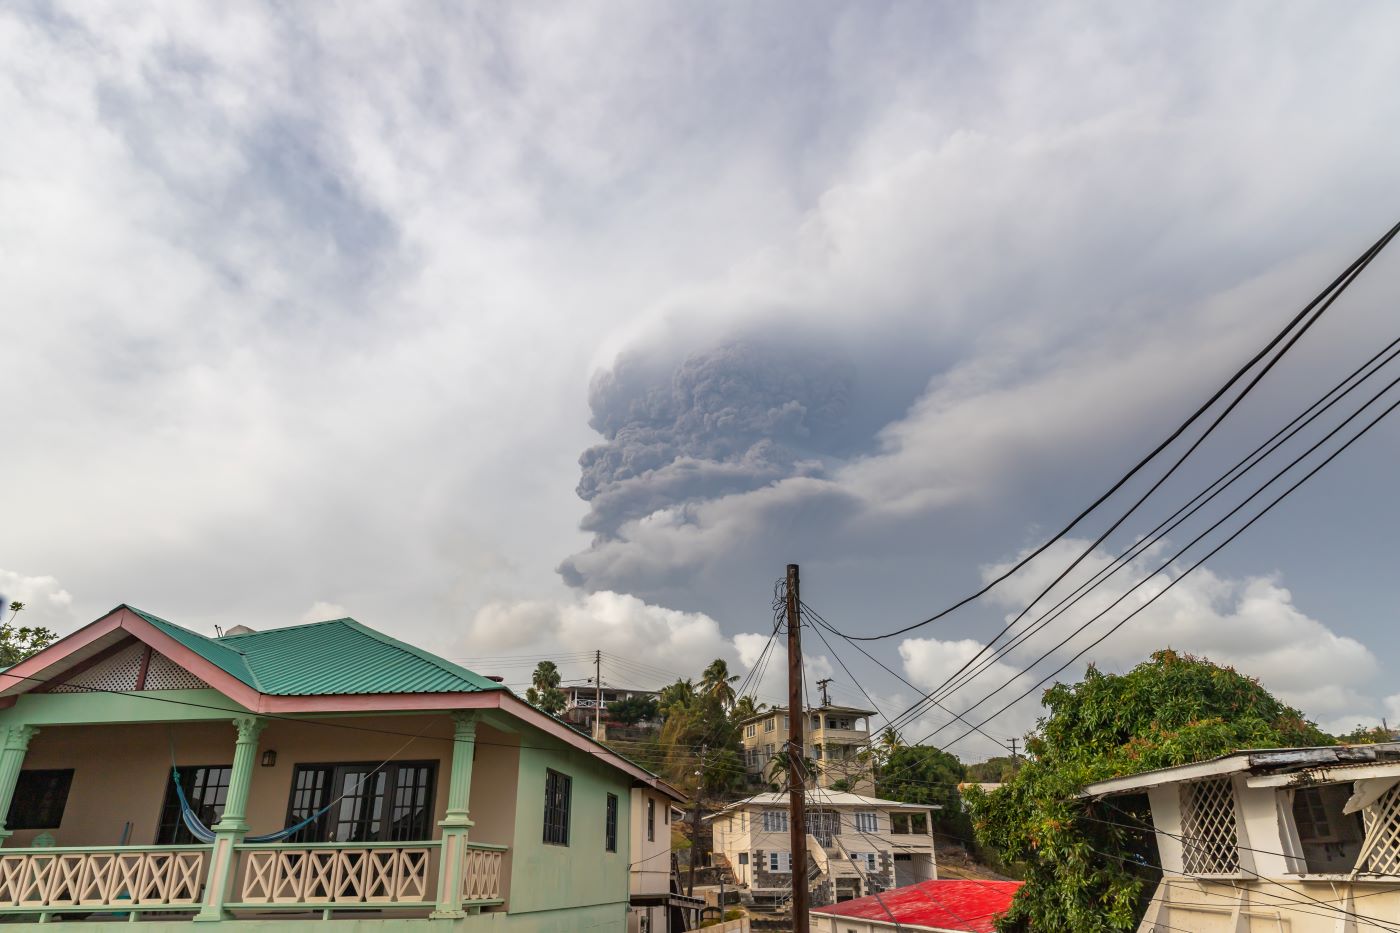 View of La Soufriere volcanic eruption from nearby Belmont